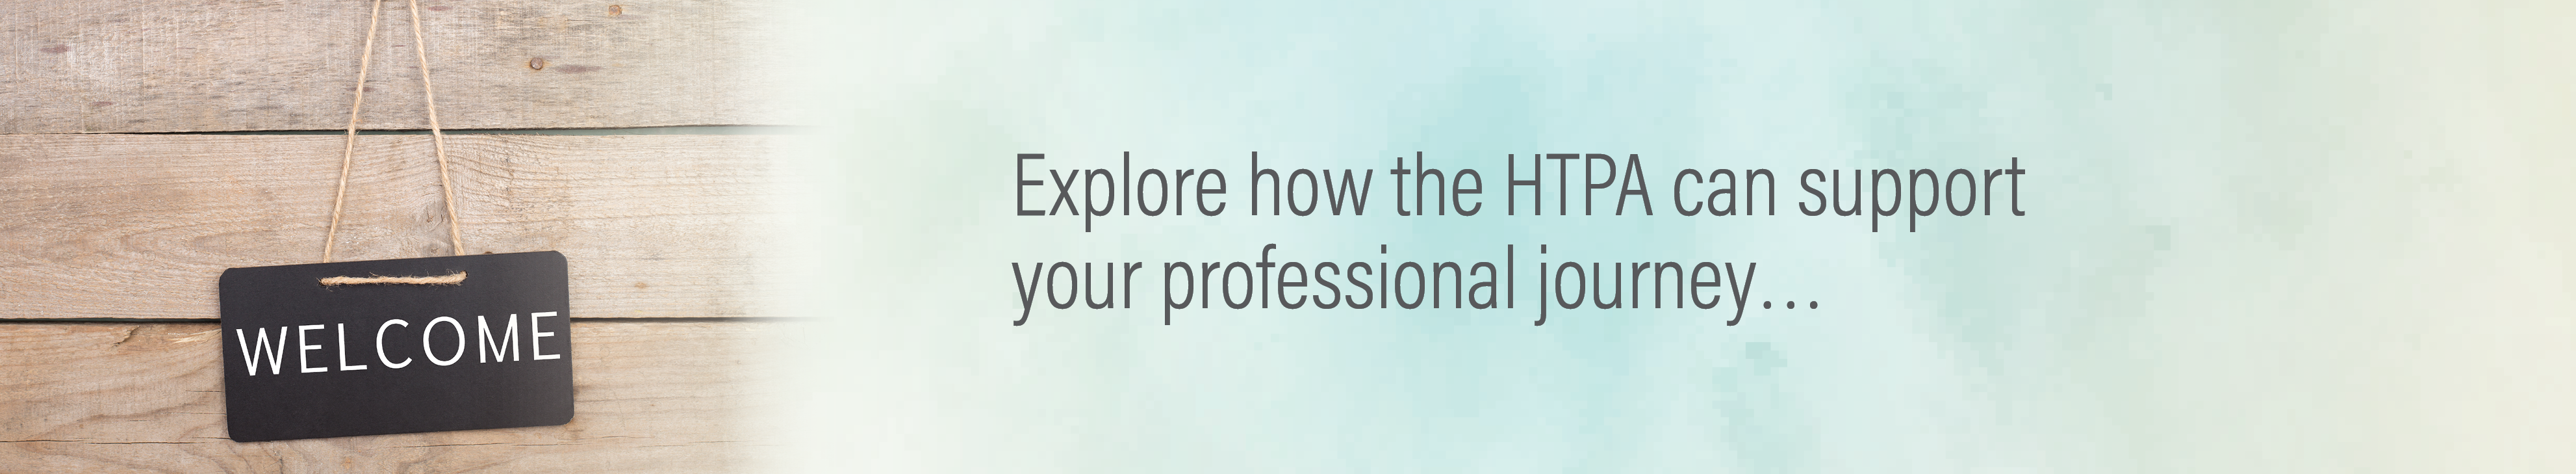 Healing Touch Professional Association - Home